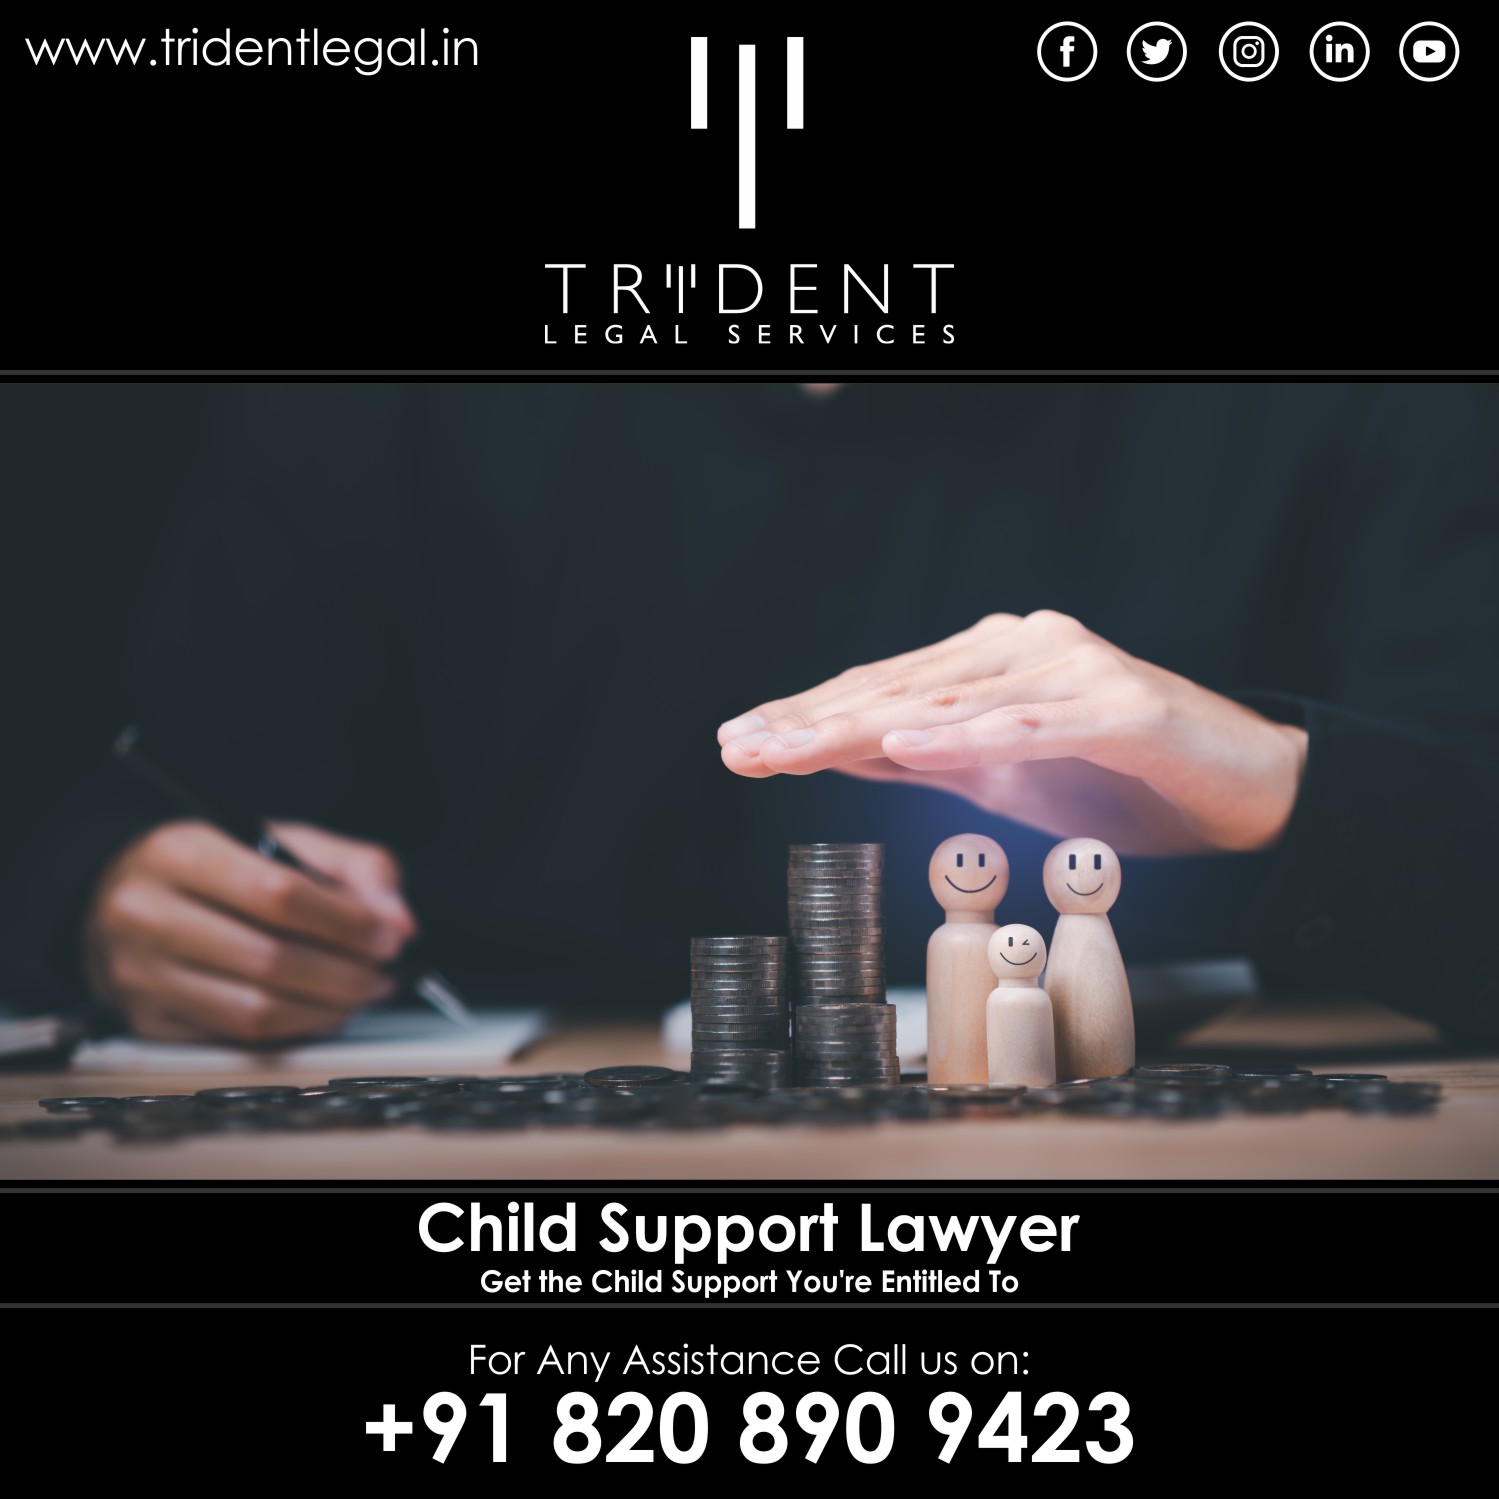 Child Support Lawyer in Pune